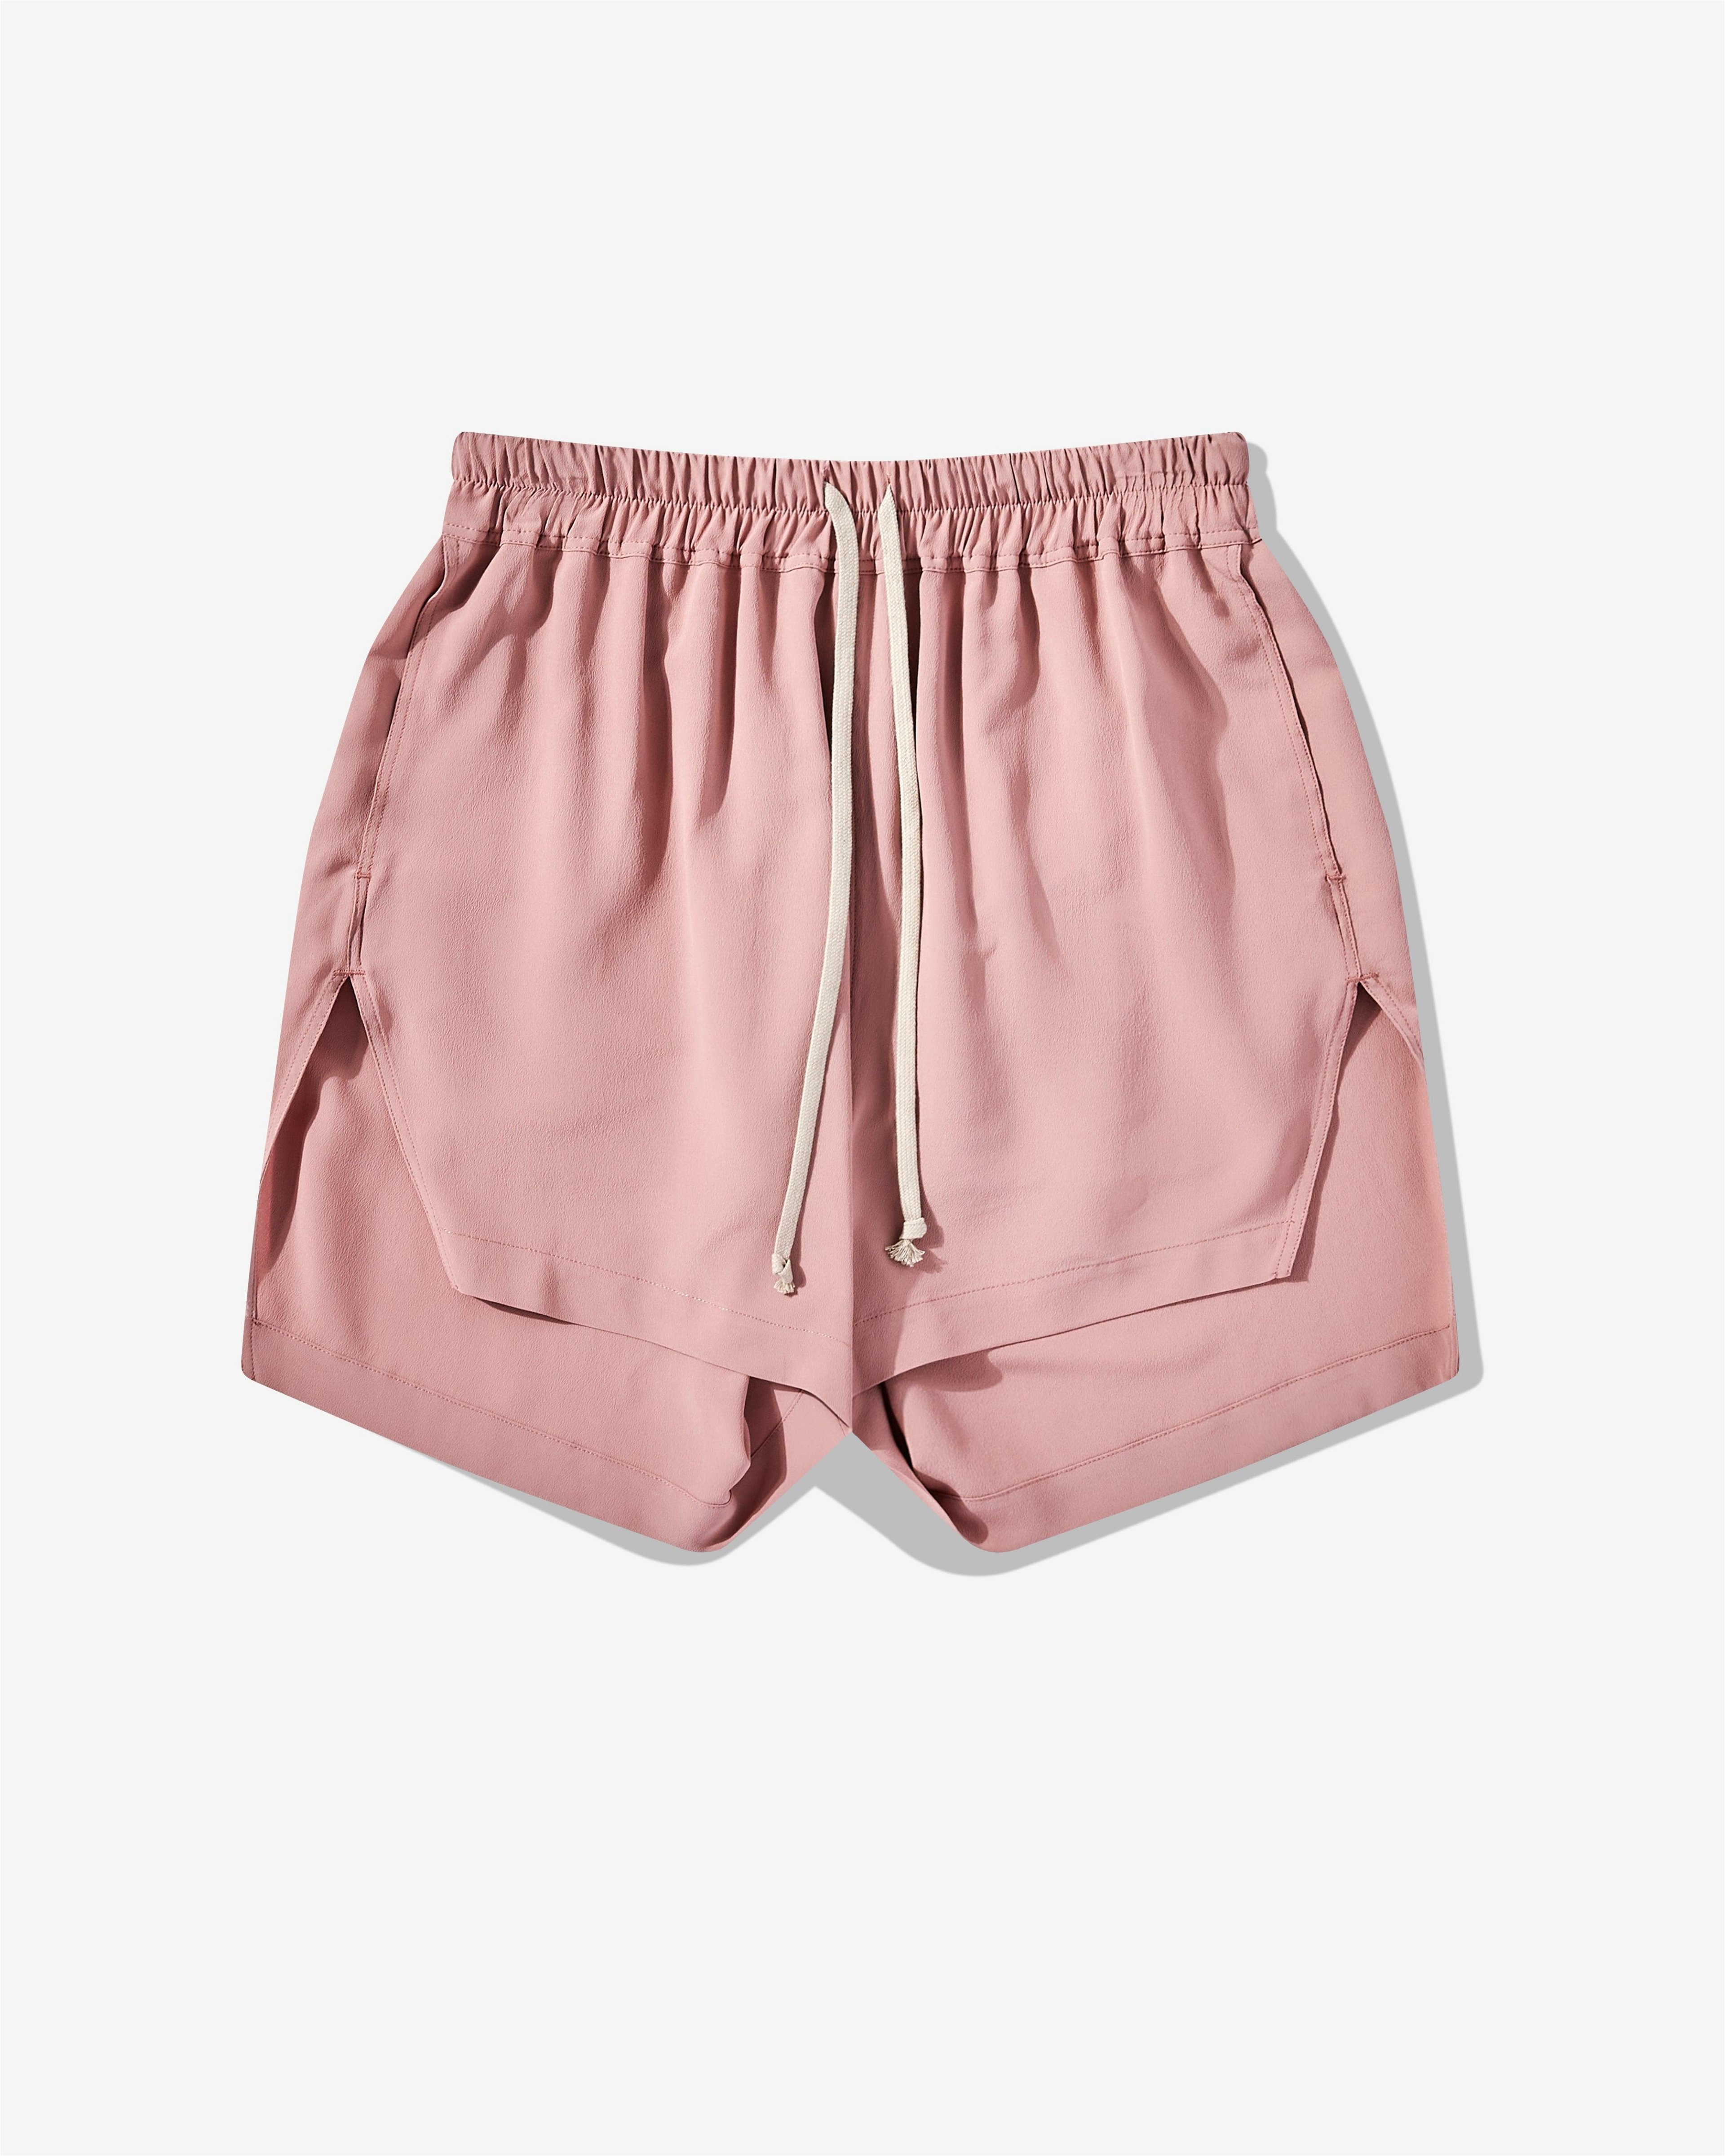 Rick Owens - Women's Boxer Shorts - (Dusty Pink) by RICK OWENS